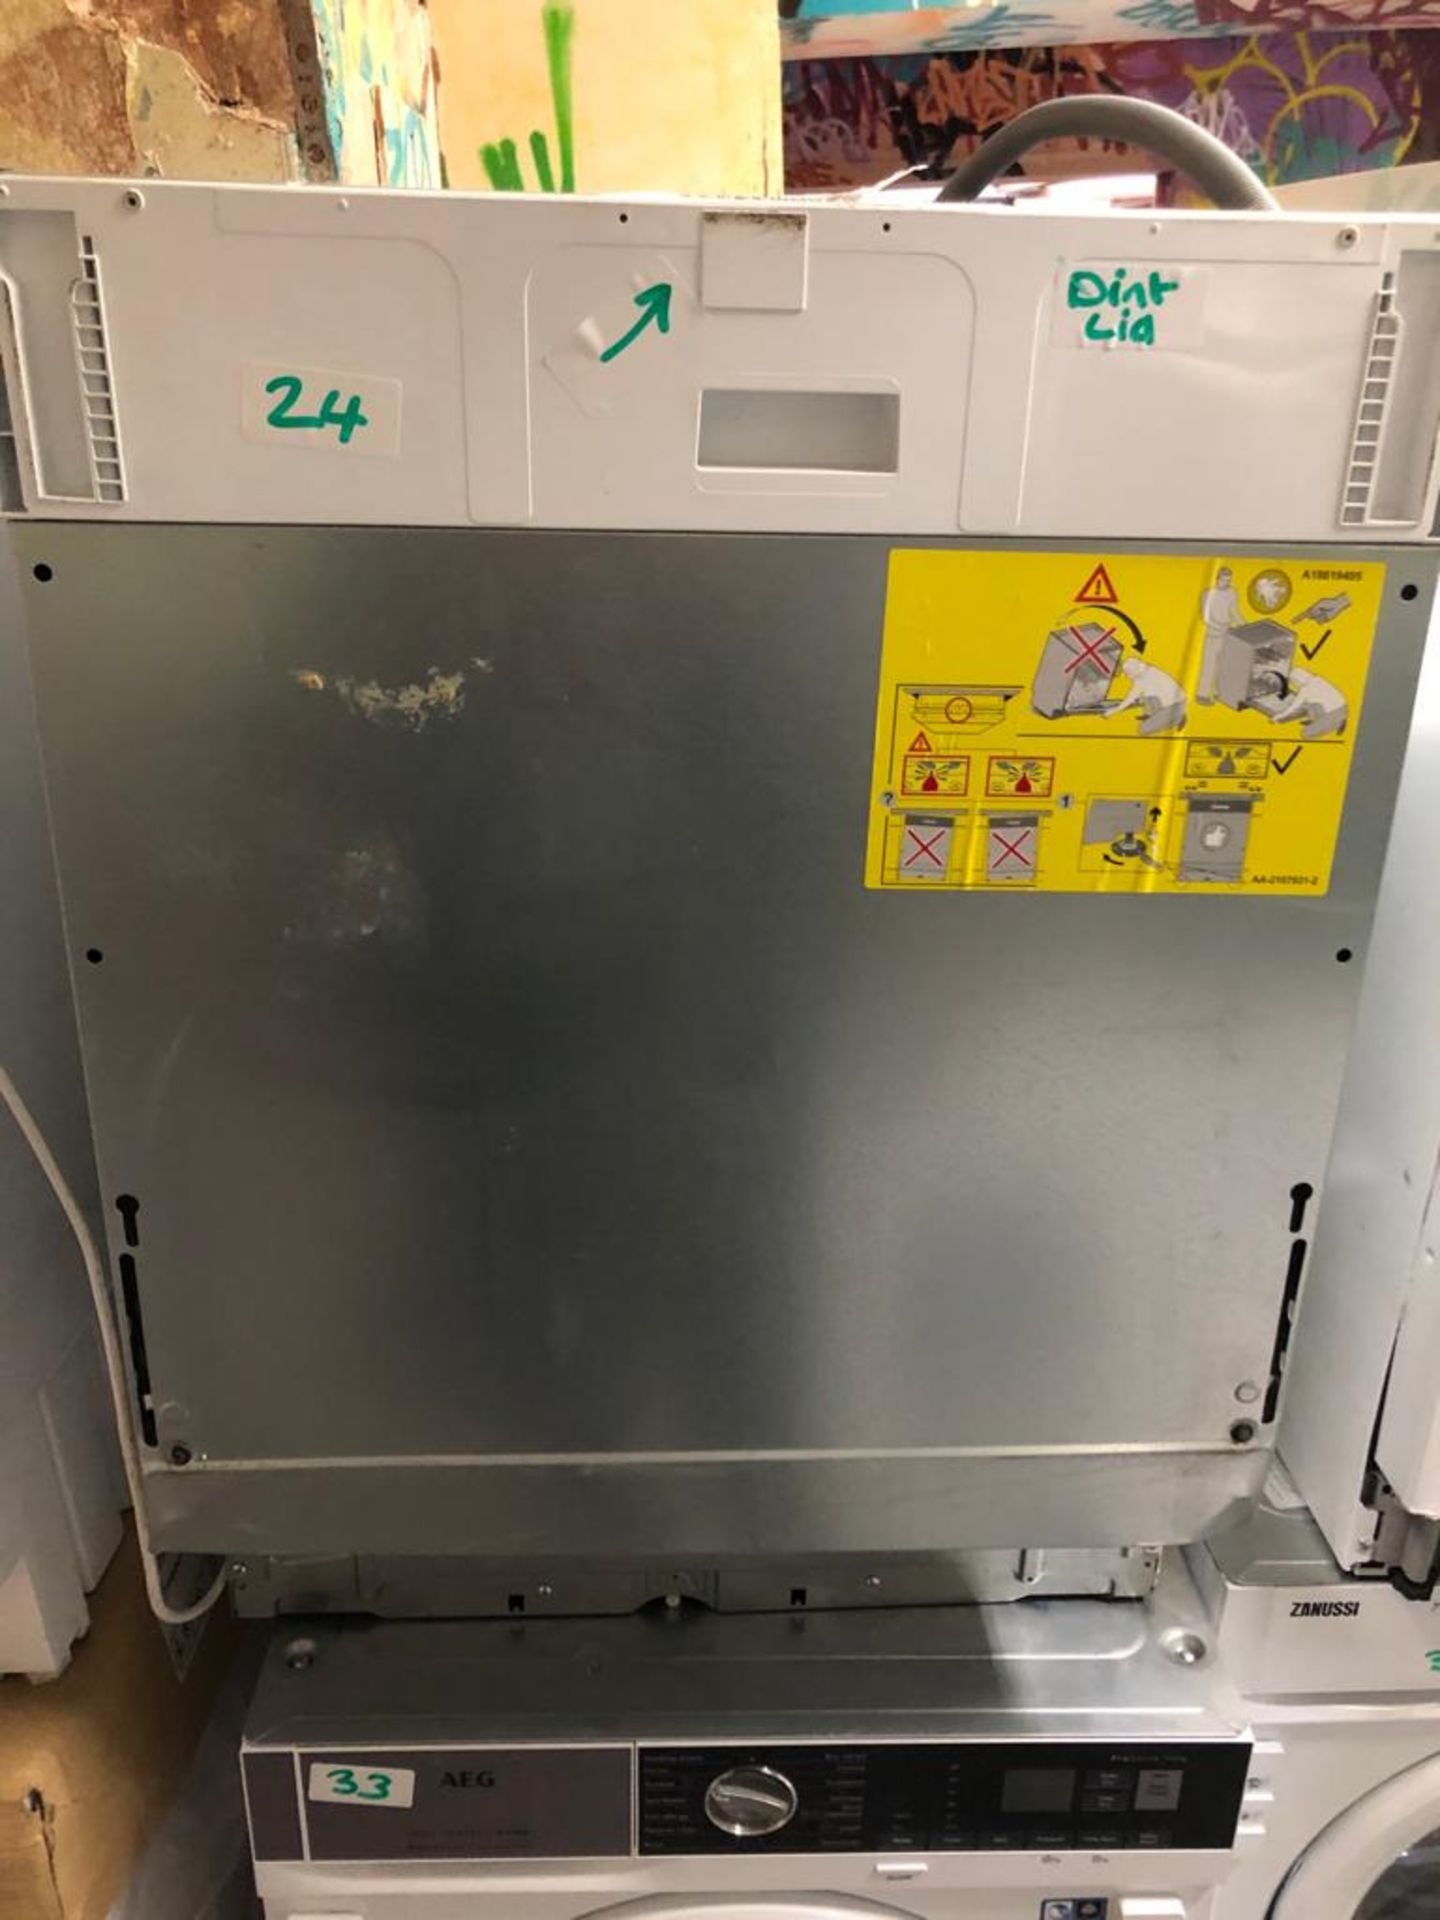 NEW/GRADED AND UNPACKAGED Zanussi, ZDLN1511, Fully Integrated Dishwasher (Mild scuffs to front and